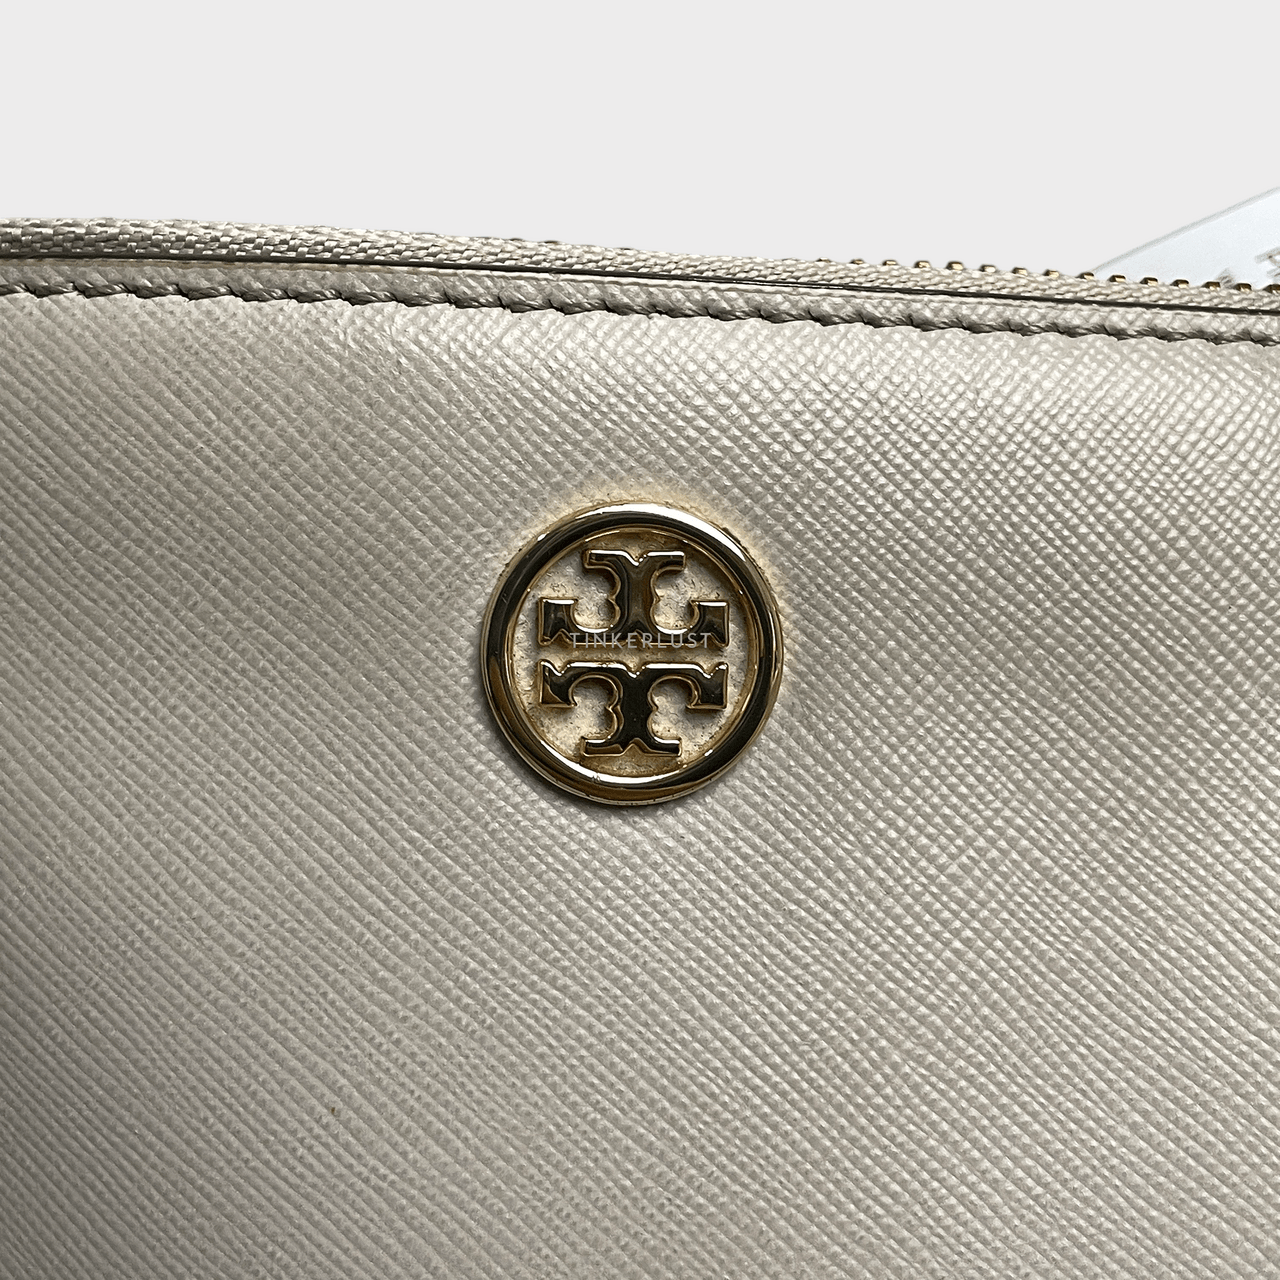 Tory Burch Robinson Double Zip Large Grey GHW Tote Bag